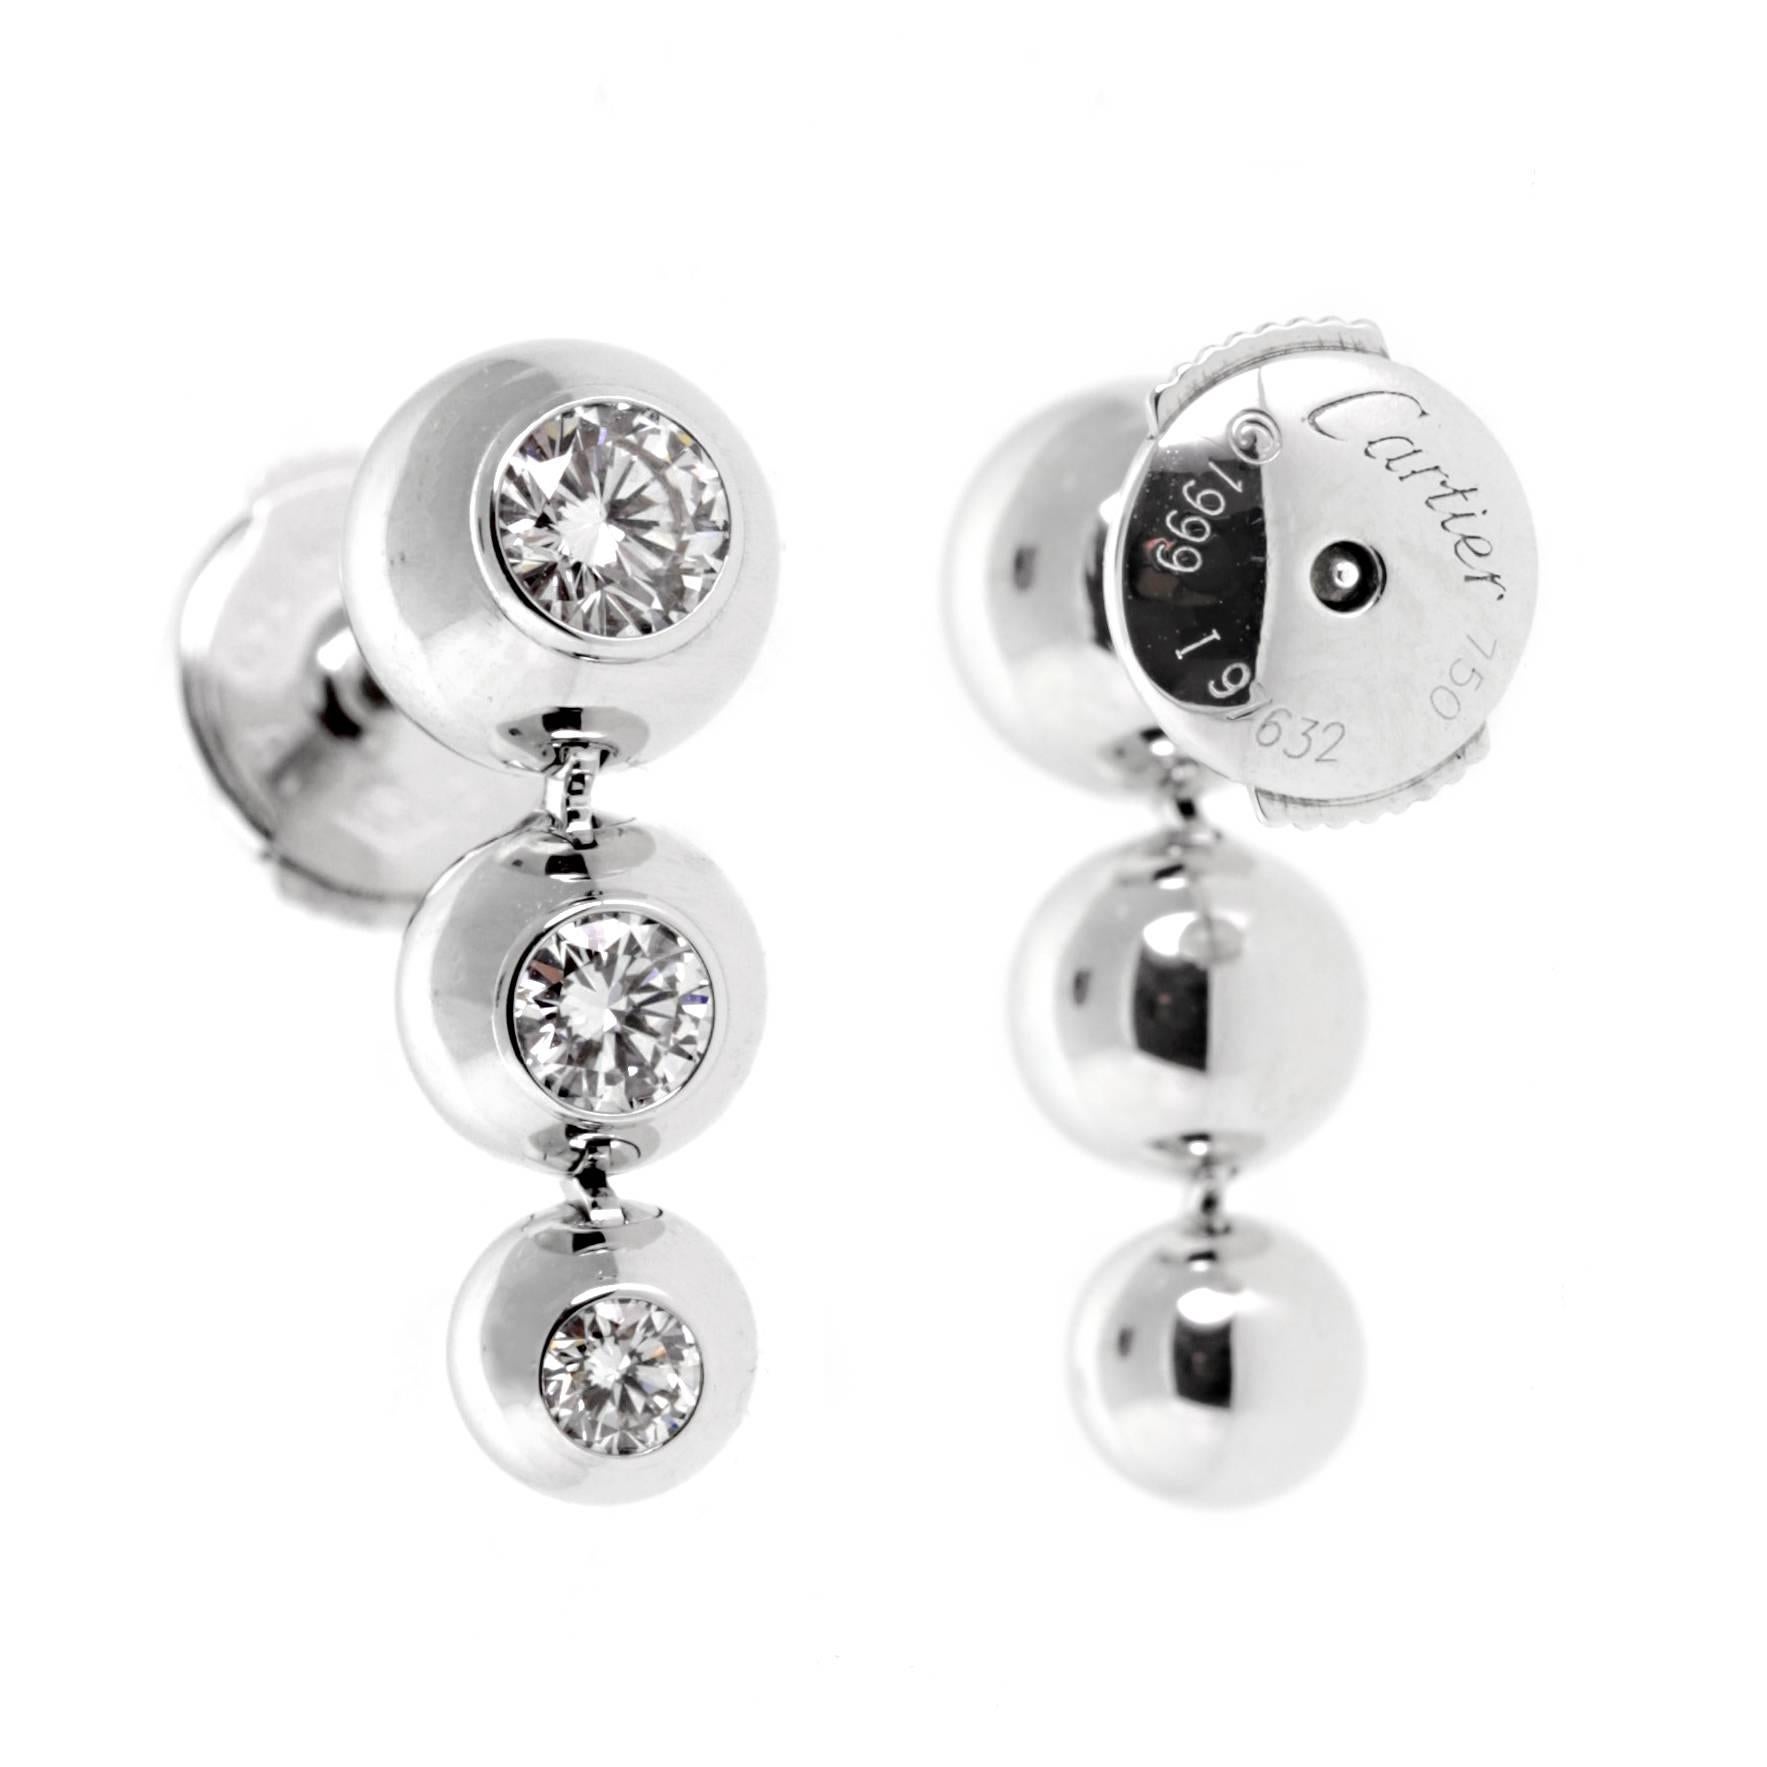 An authentic pair of Cartier diamond earrings each featuring 3 of the finest Cartier round brilliant cut diamonds set in white gold. The earrings have a length of .70"

